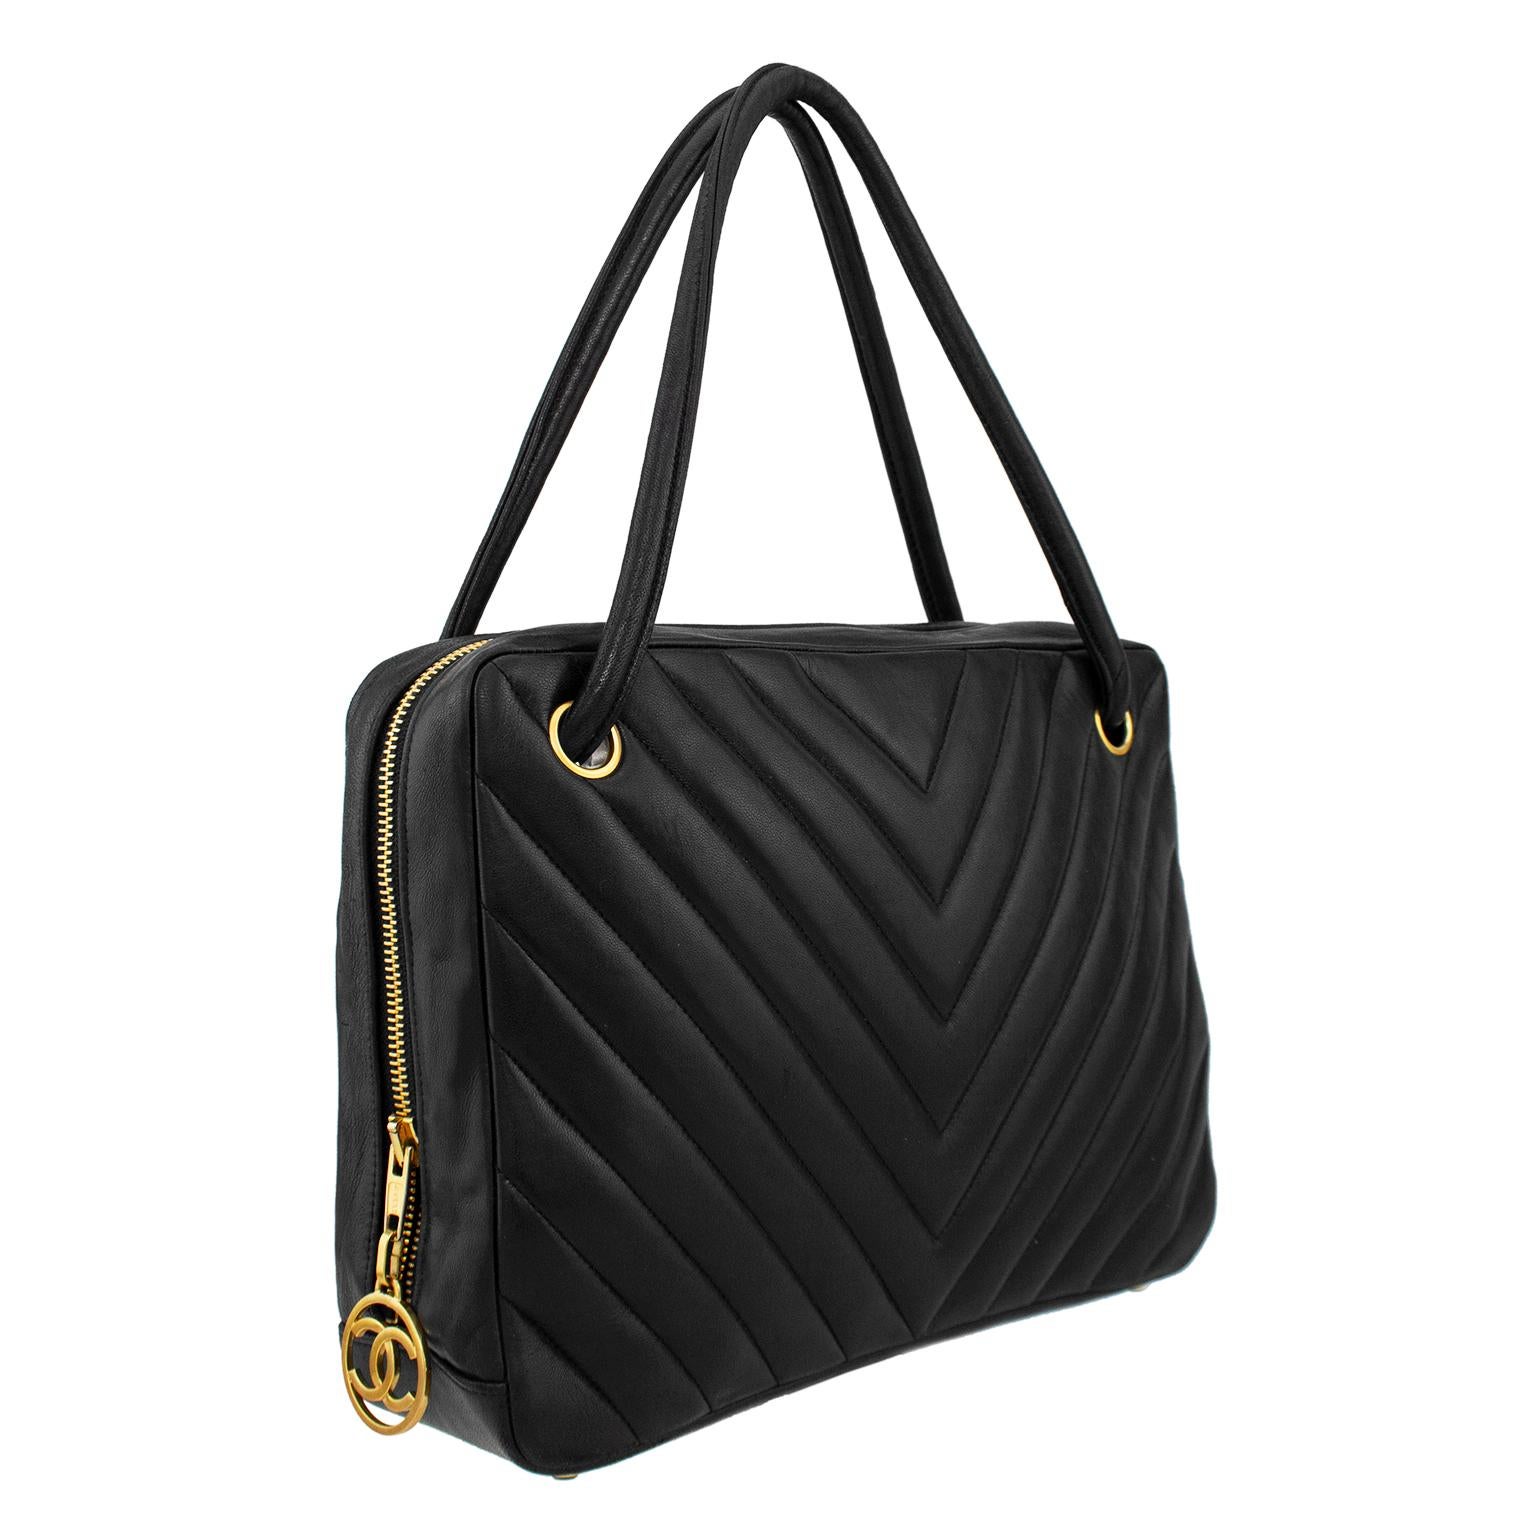 Chanel large camera bag from the 1990s. Supple black lambskin leather in chevron pattern with single exterior slit pocket. Black leather double top handles with are connected in one continuous loop through gold tone metal grommets. Gold tone metal